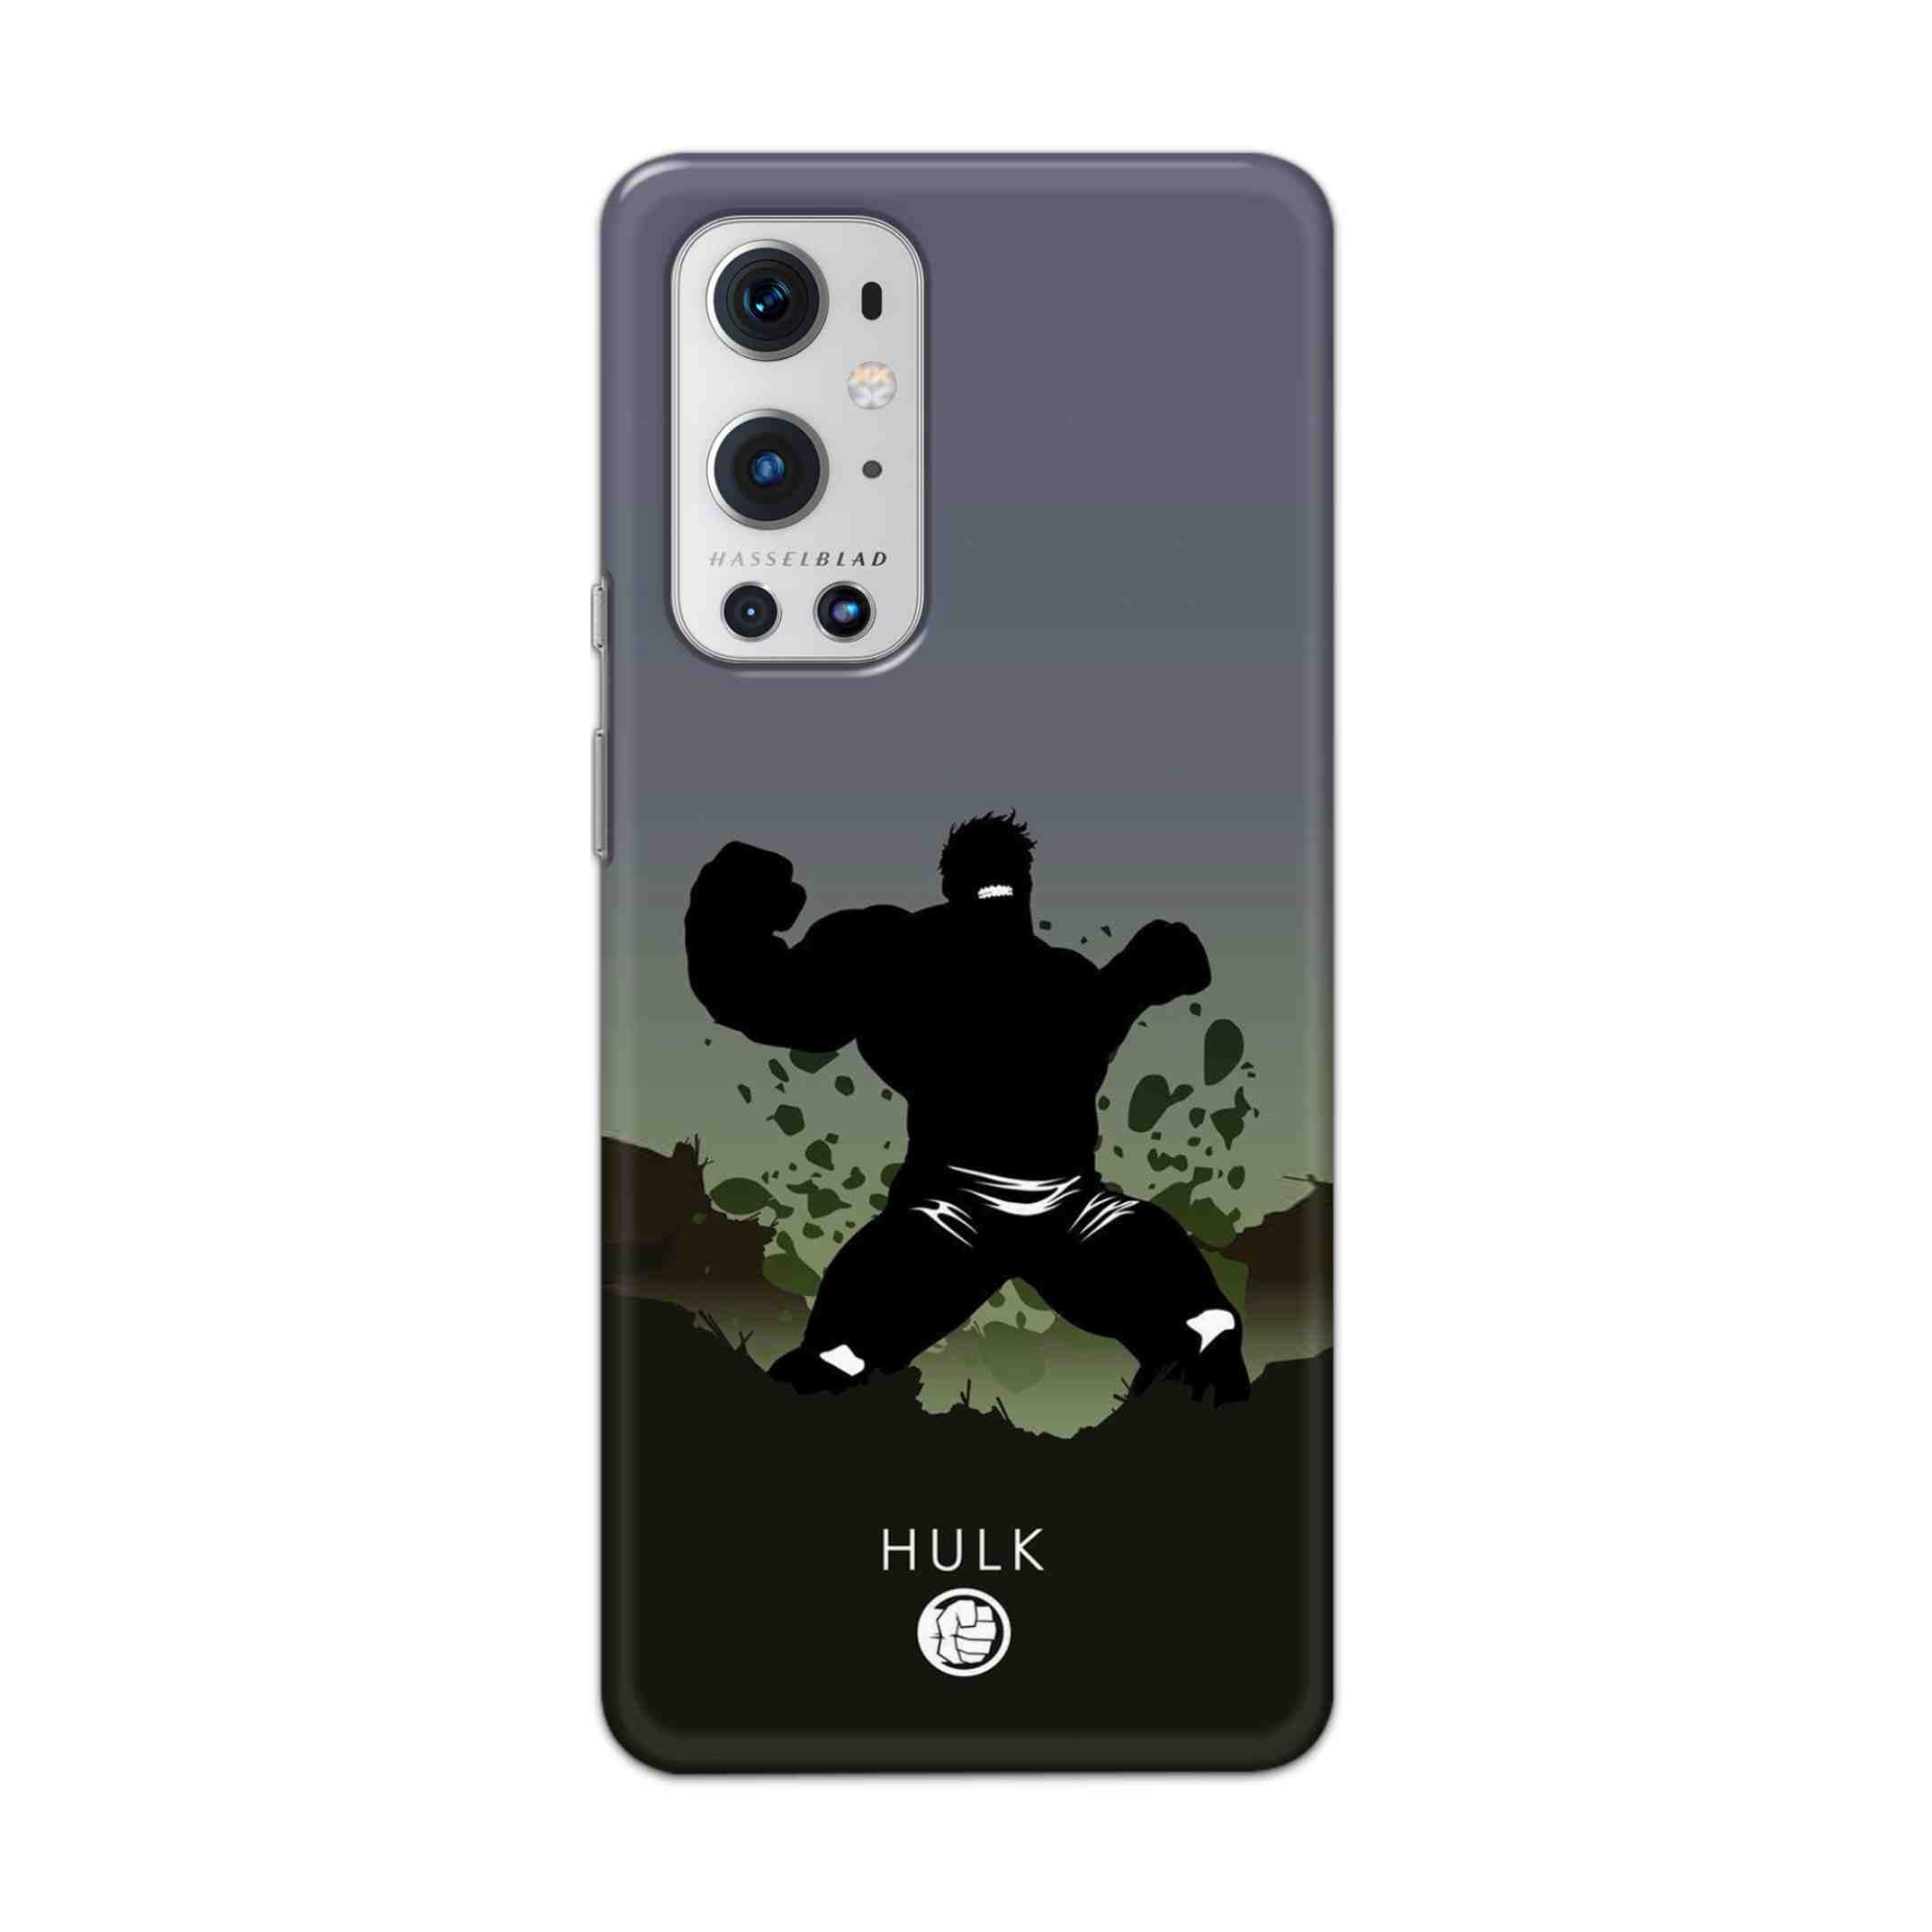 Buy Hulk Drax Hard Back Mobile Phone Case Cover For OnePlus 9 Pro Online